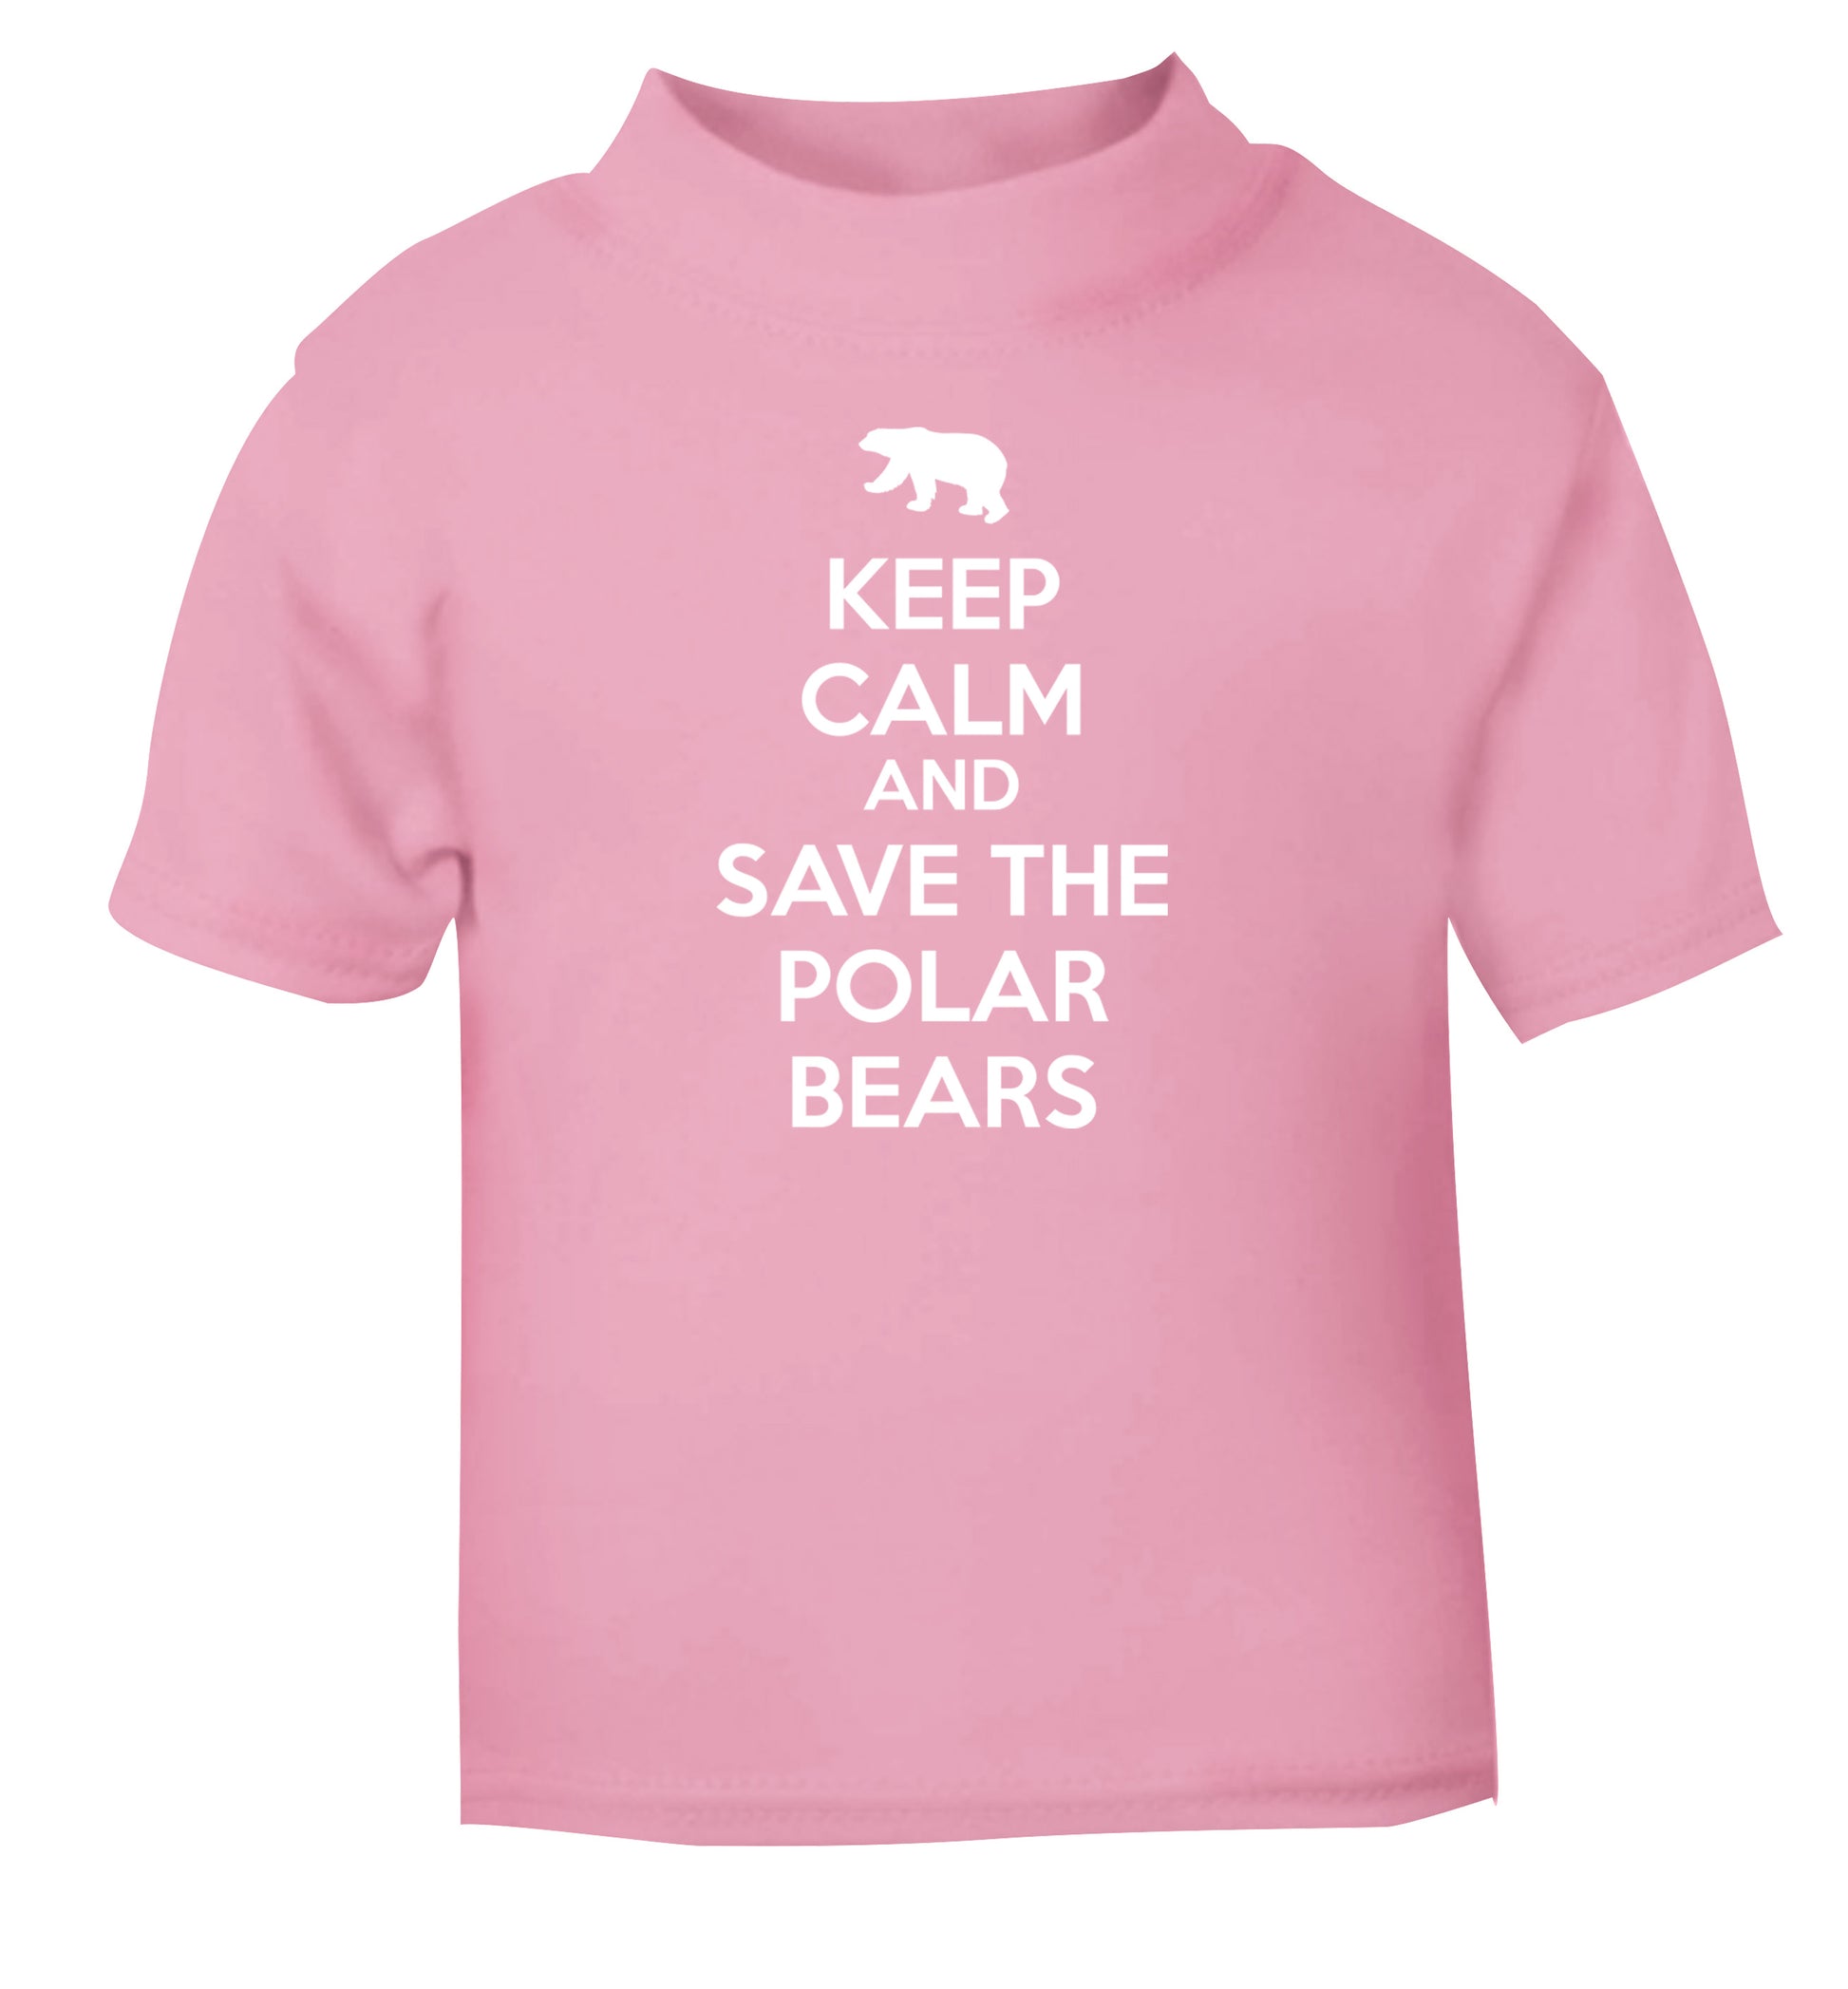 Keep calm and save the polar bears light pink Baby Toddler Tshirt 2 Years